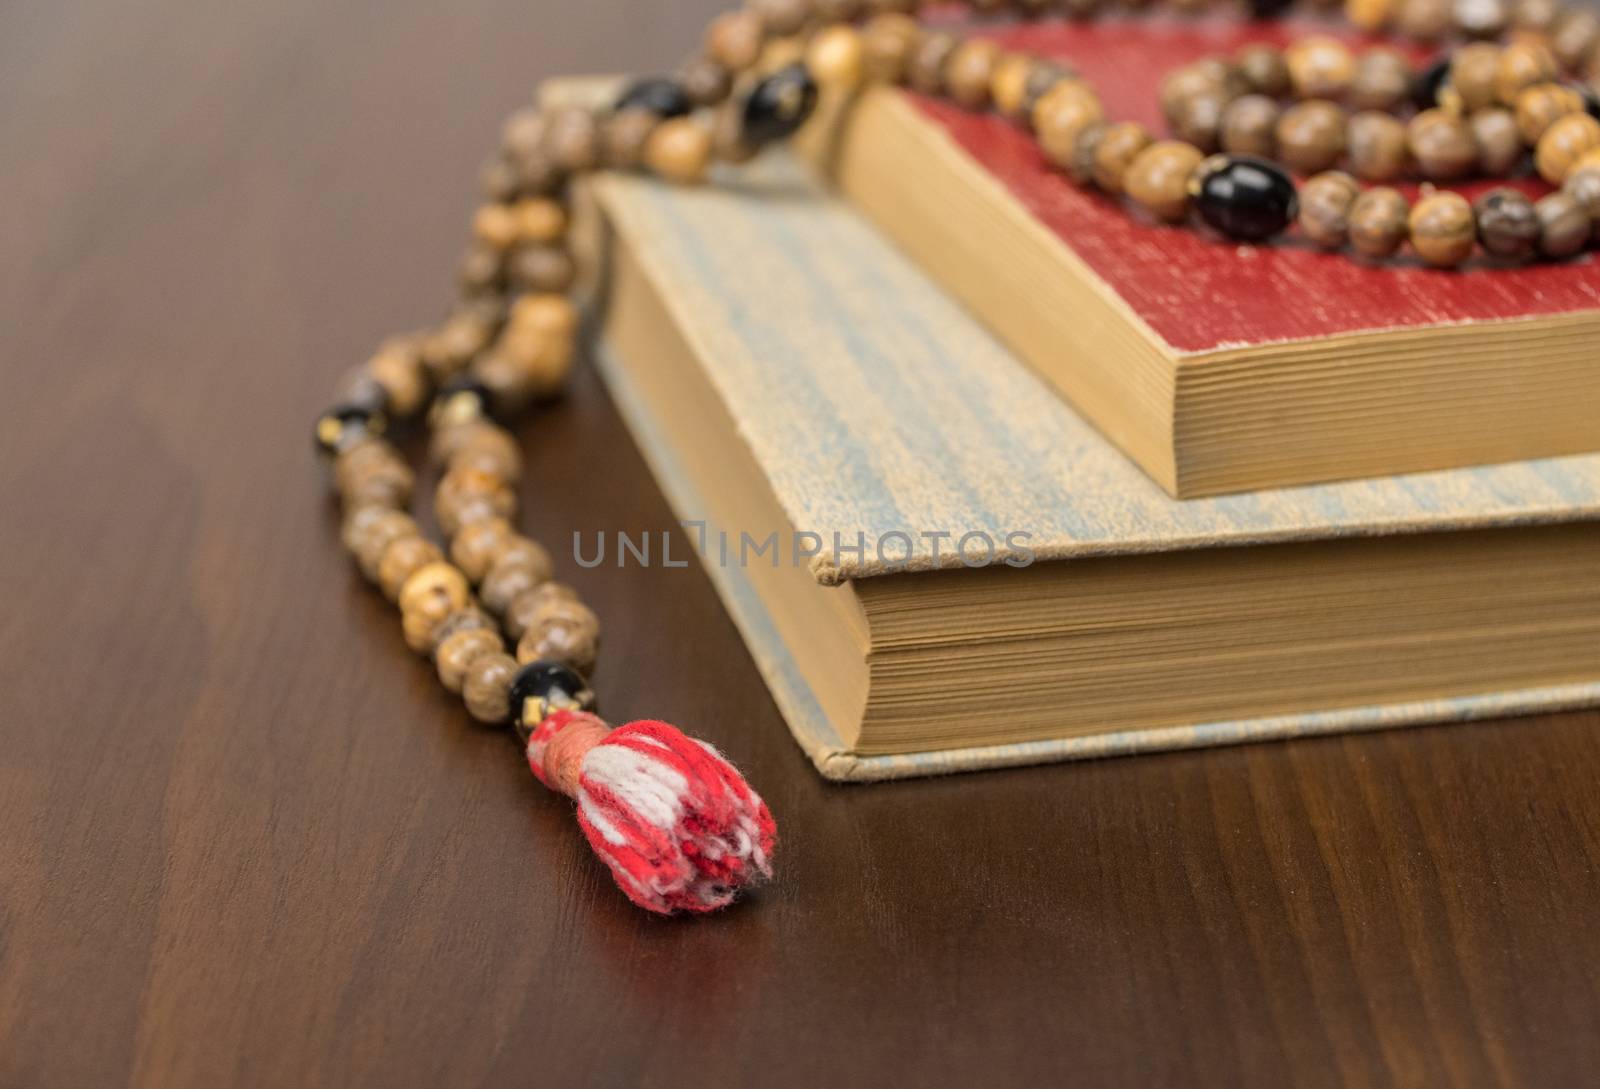 Muslim prayer beads and Quran isolated on a wooden background. Islamic and Muslim concepts